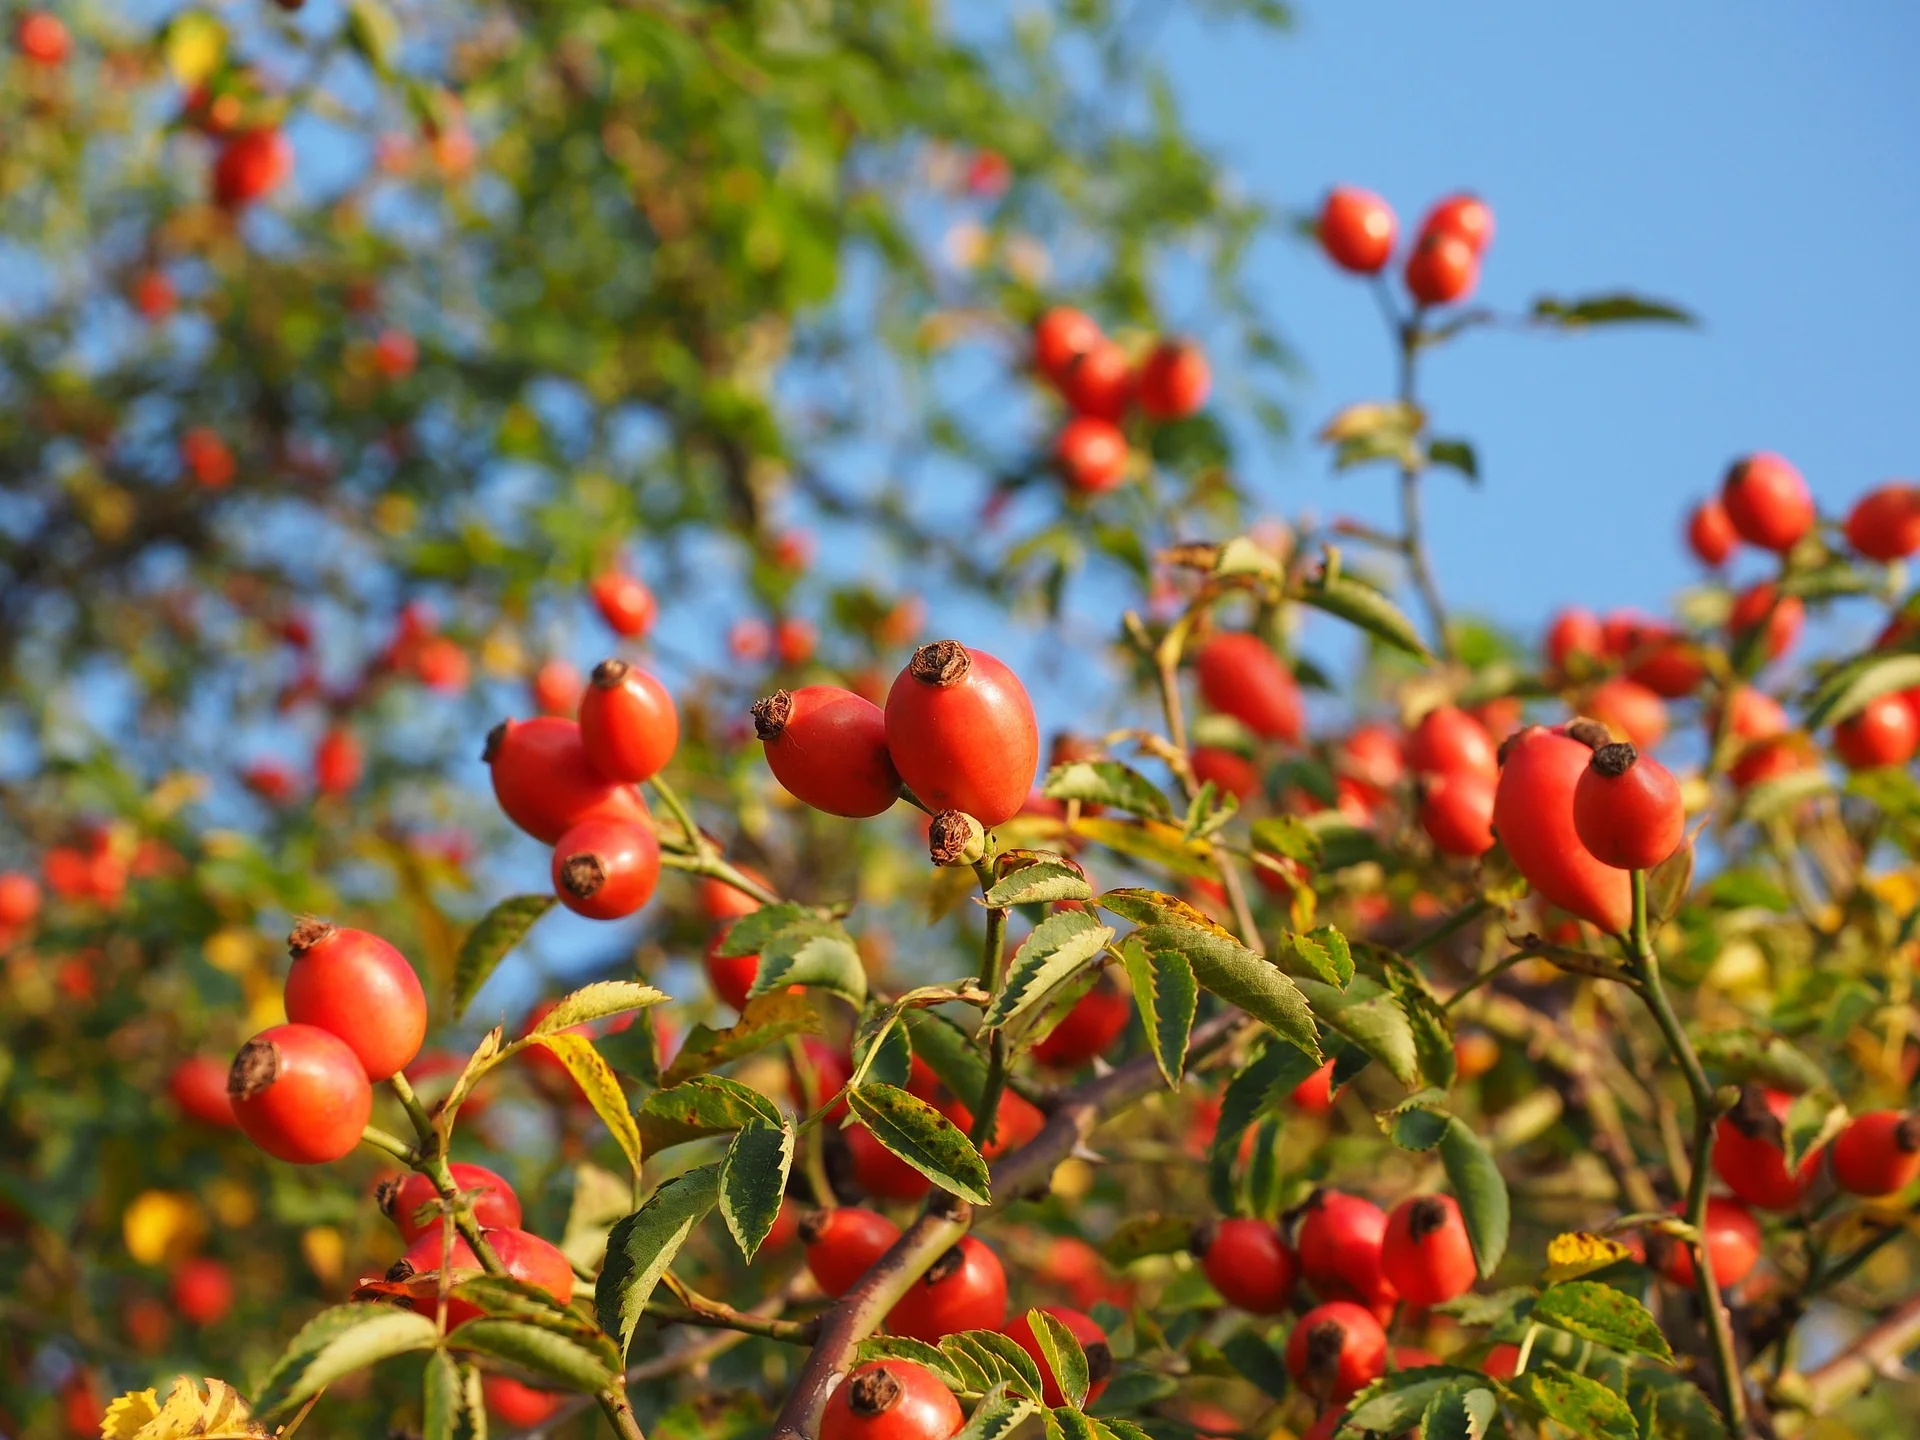 Rose Hips - Explaining The Benefits And Risks